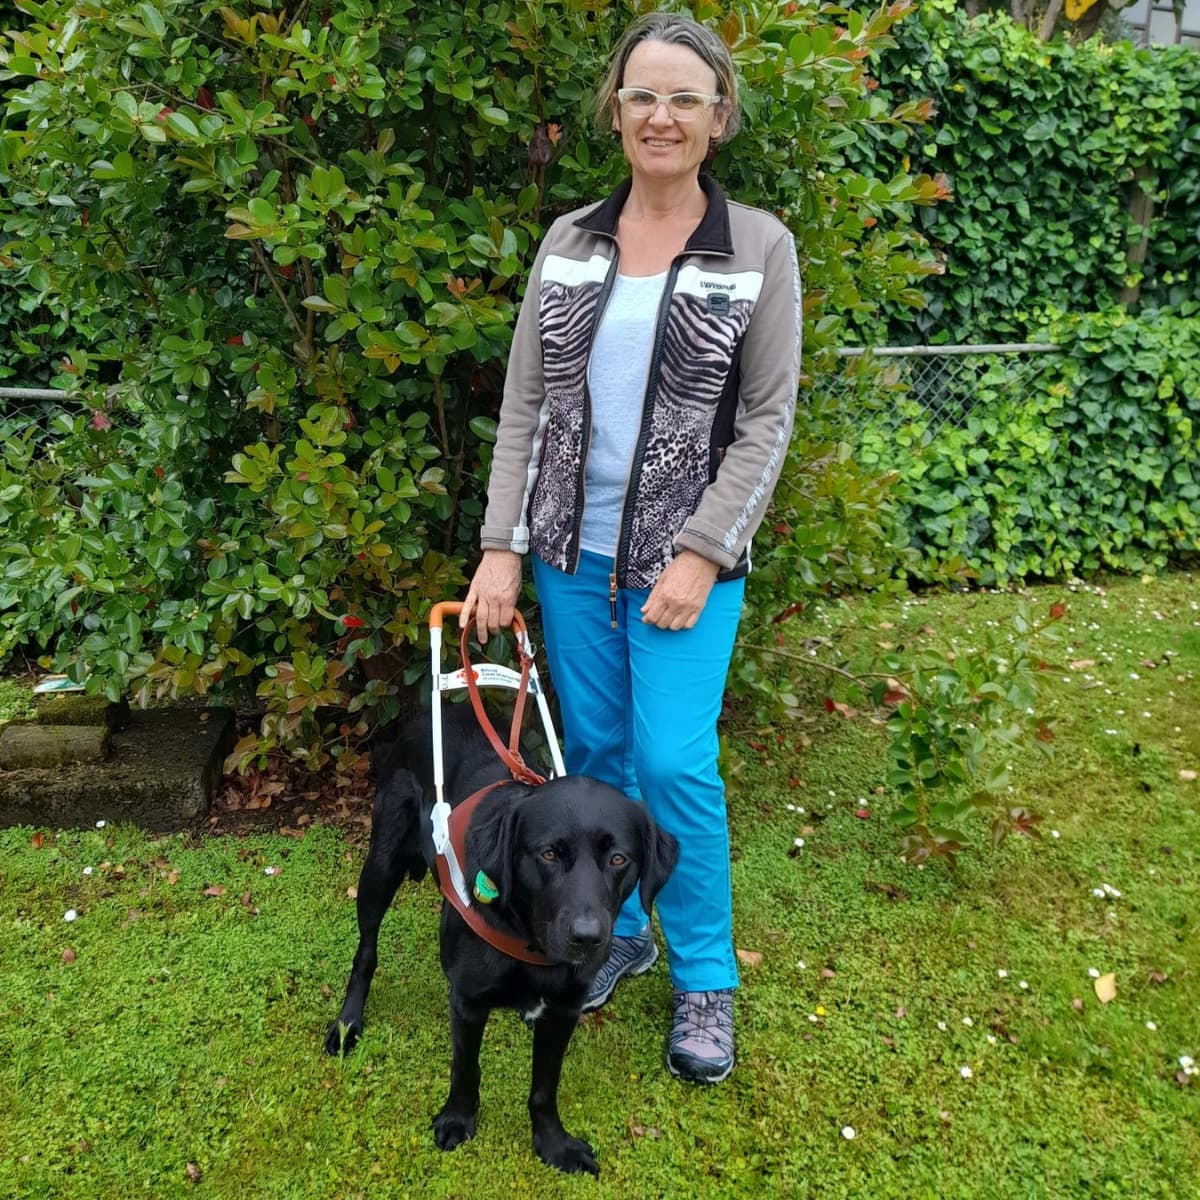 Our client, Rhonda Comins standing outdoors with a tree in the background, accompanied by her guide dog, a black Labrador in a harness. Rhonda is smiling for the camera.